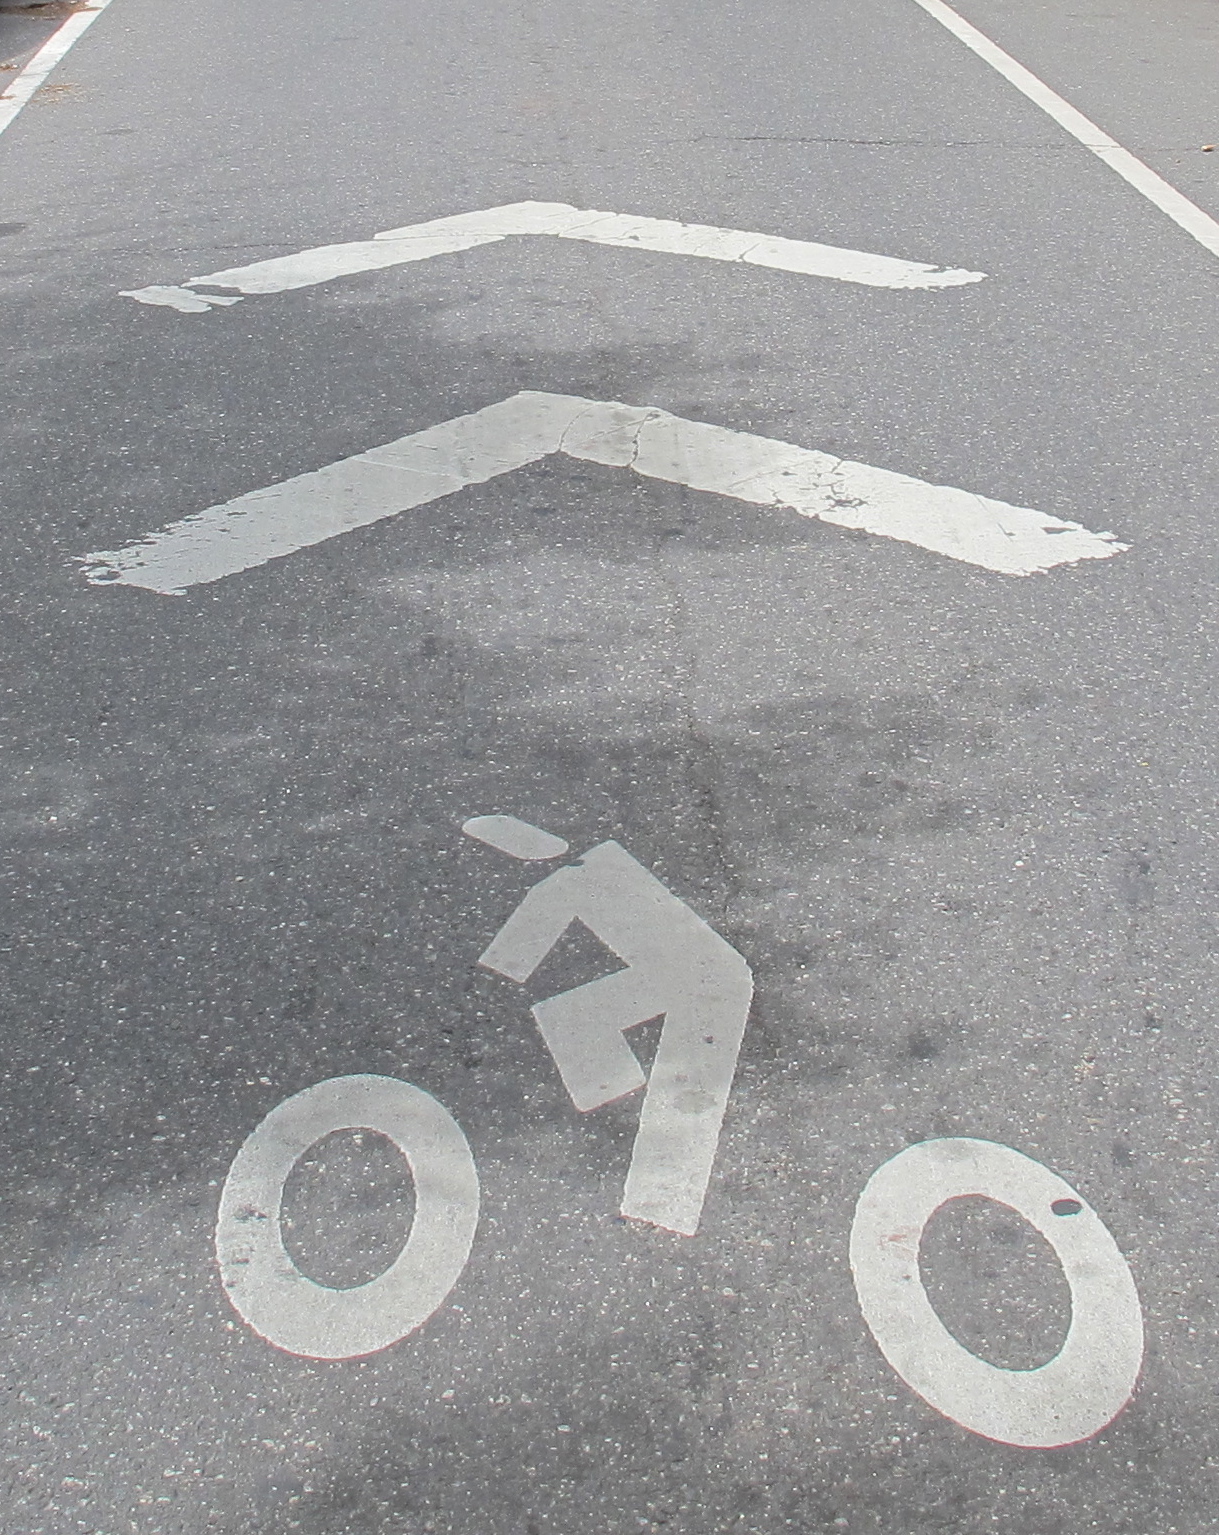 Sharrows are symbols that remind drivers and cyclists to share the lane.